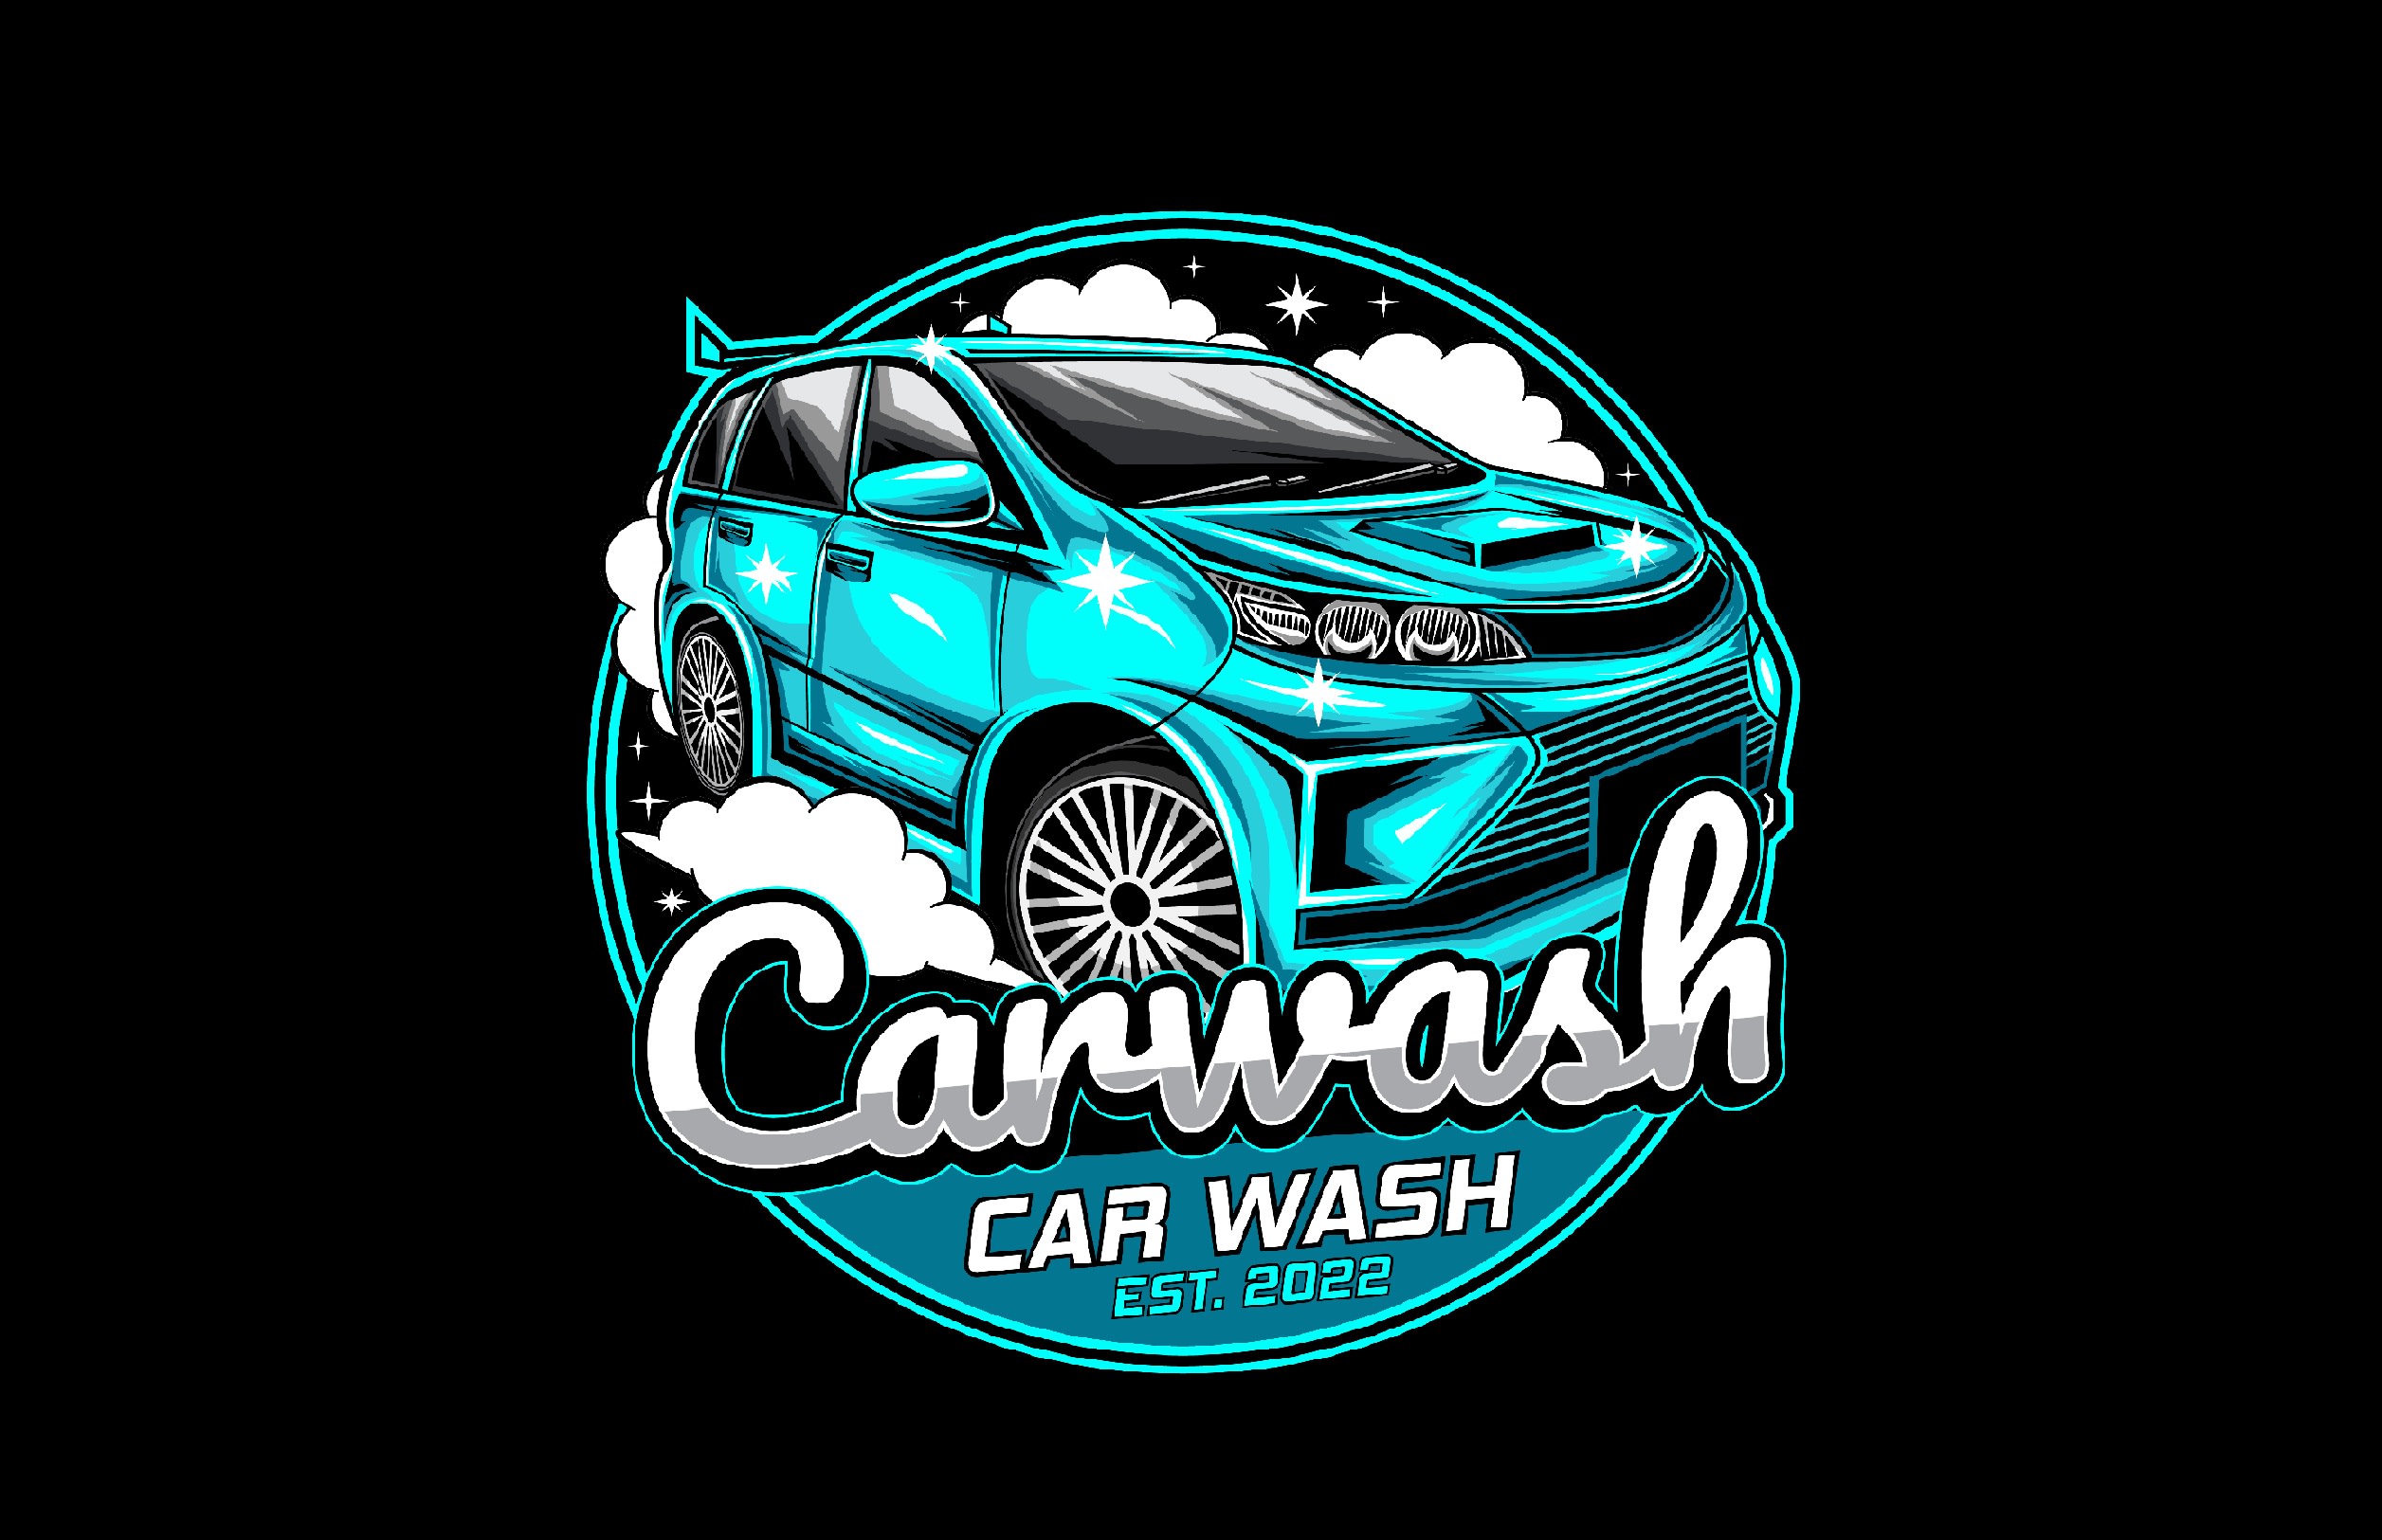 4+ Thousand Carwash Logo Royalty-Free Images, Stock Photos & Pictures